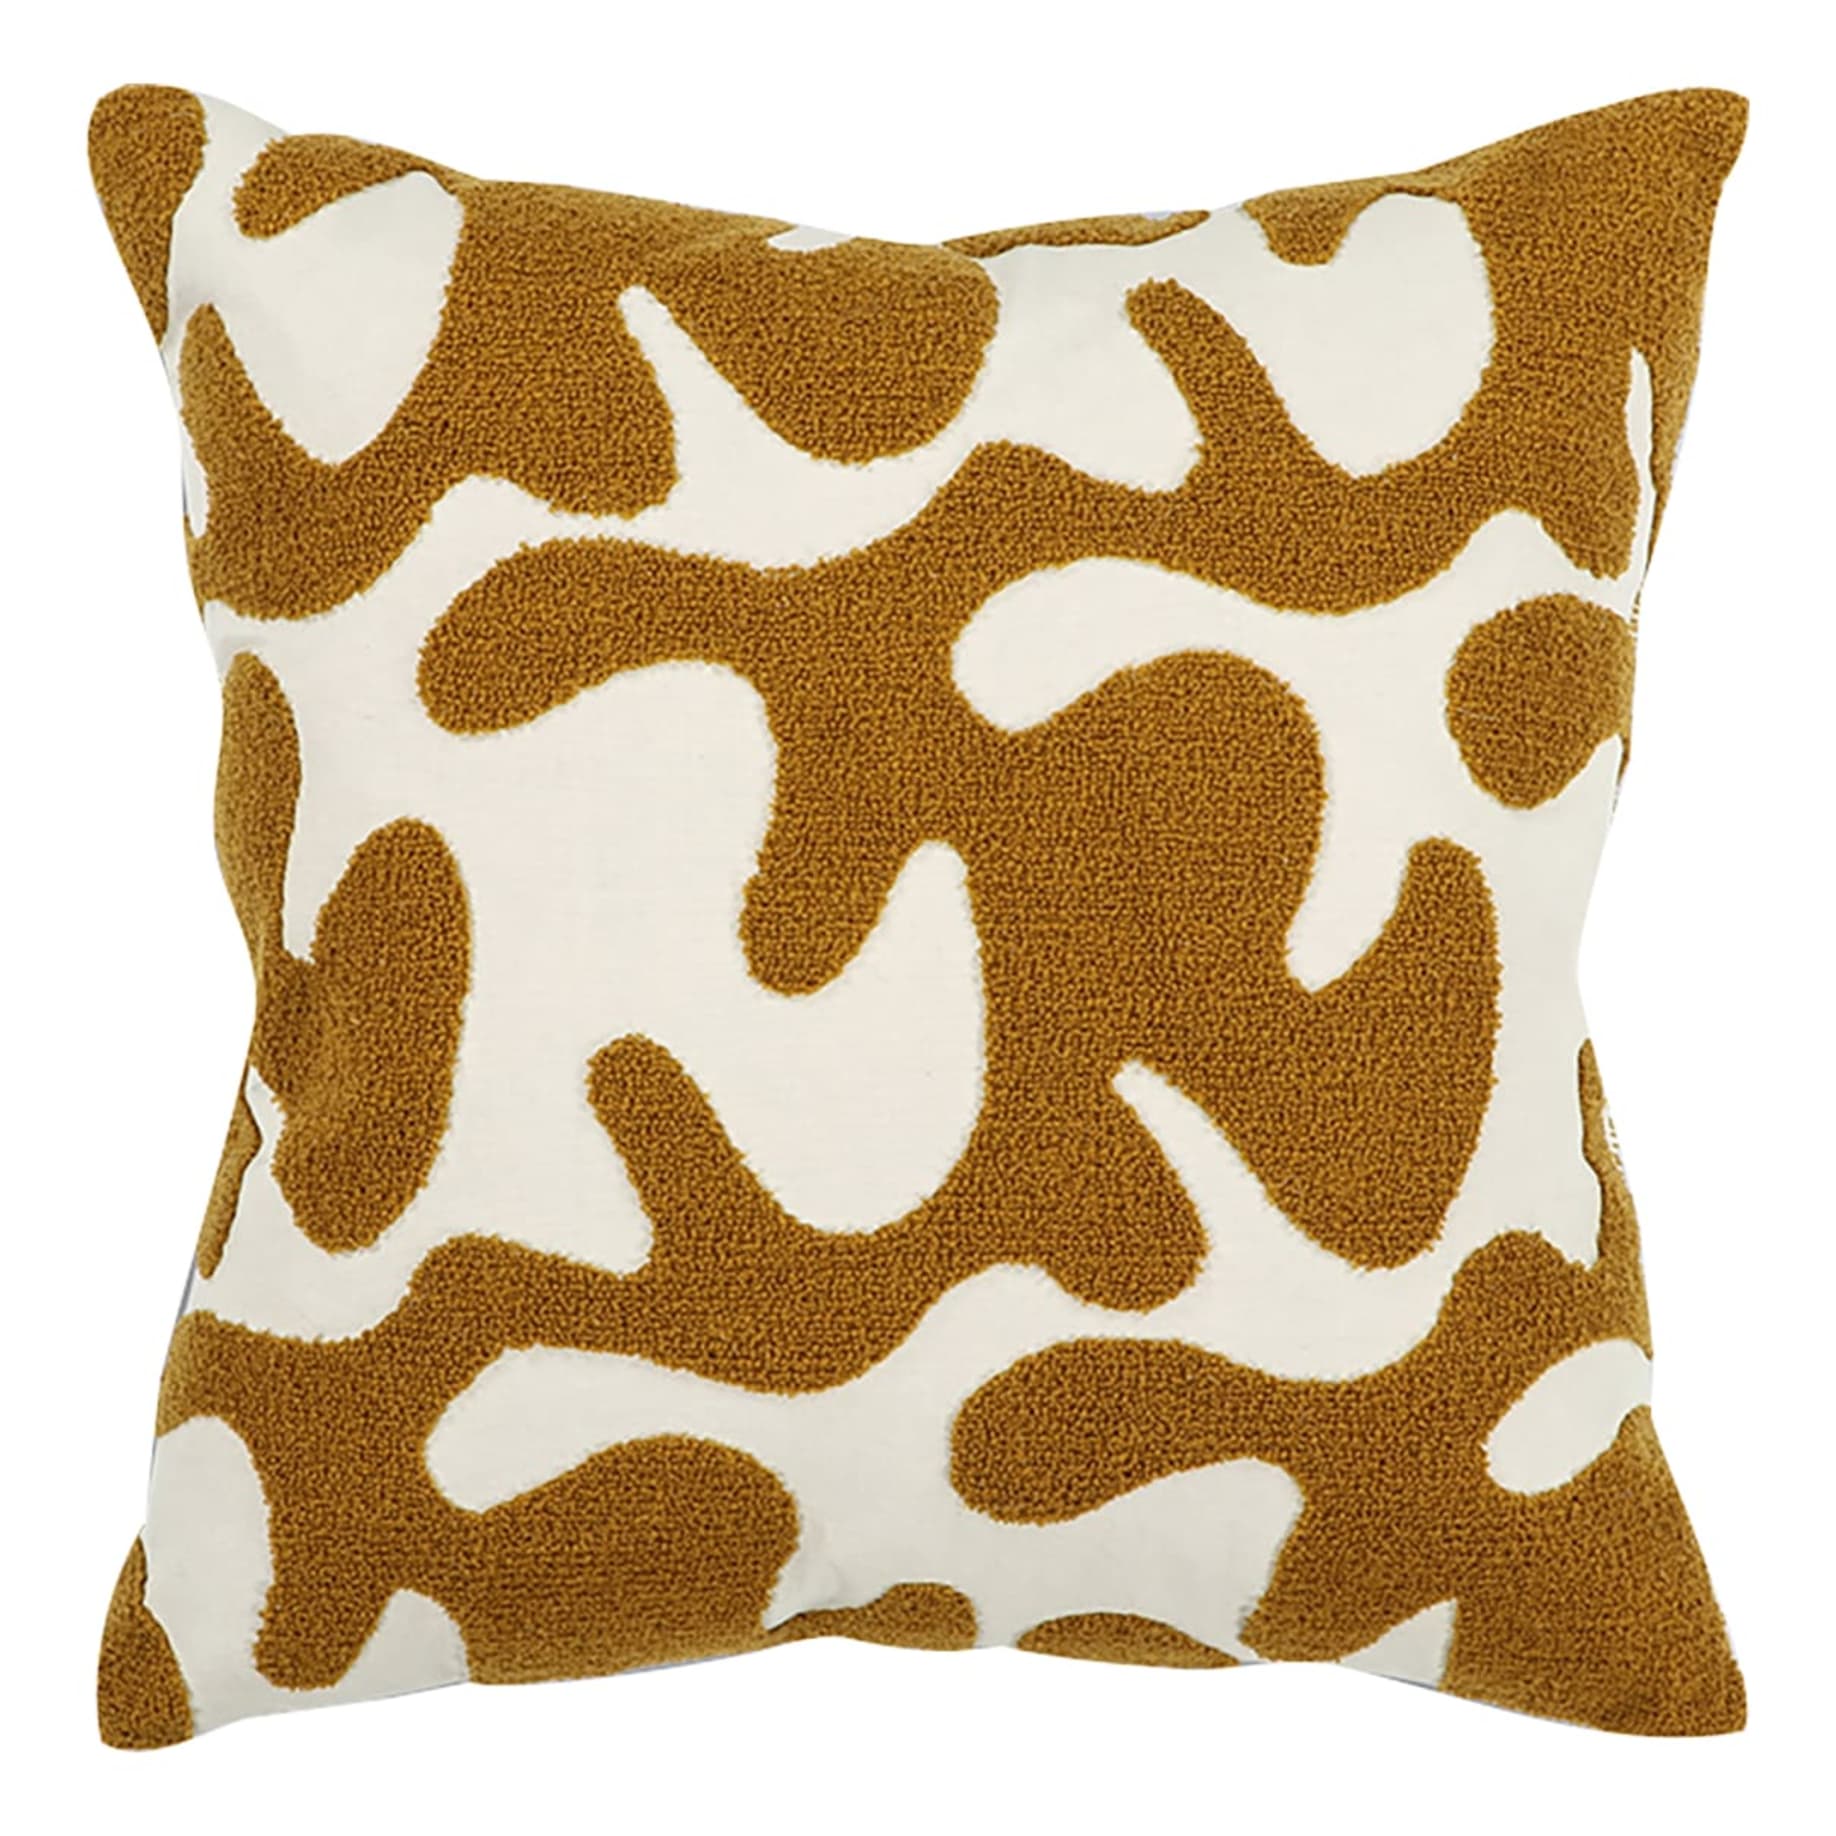 Maddison Feather Fill Cushion 50x50cm in Toffee